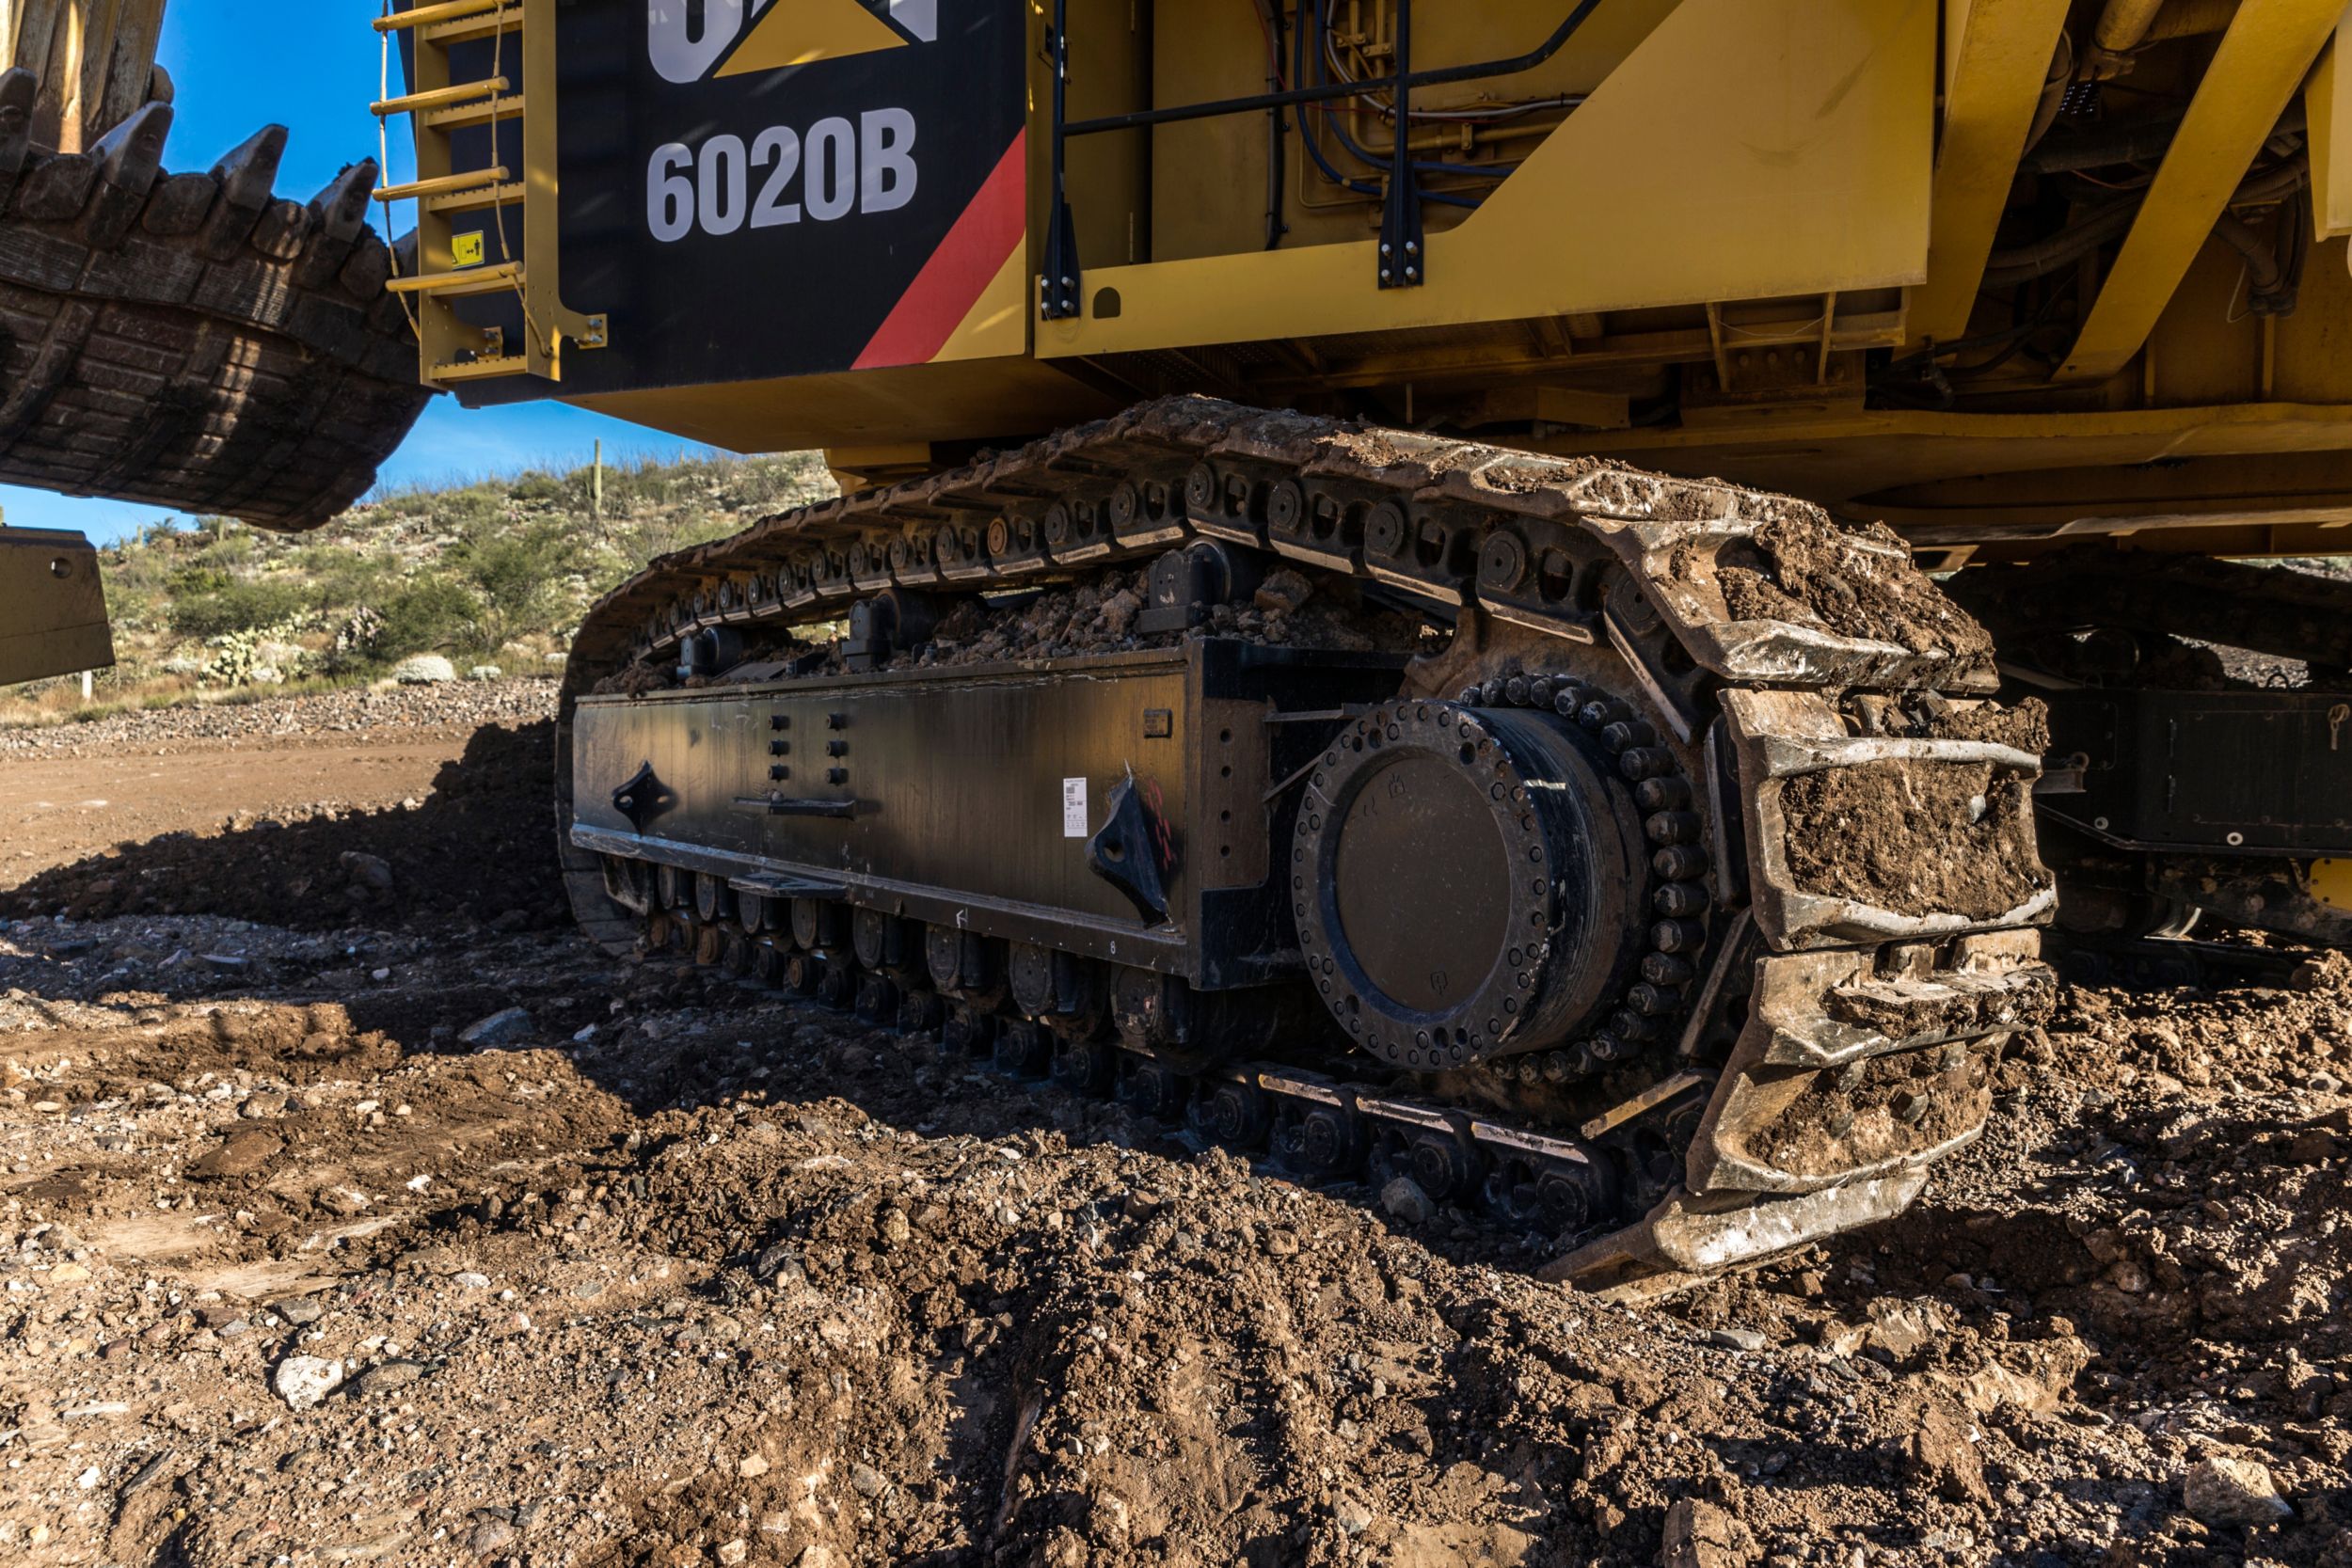 Tracks Designed for High-impact and High-travel Applications, Like Mining and Heavy Construction